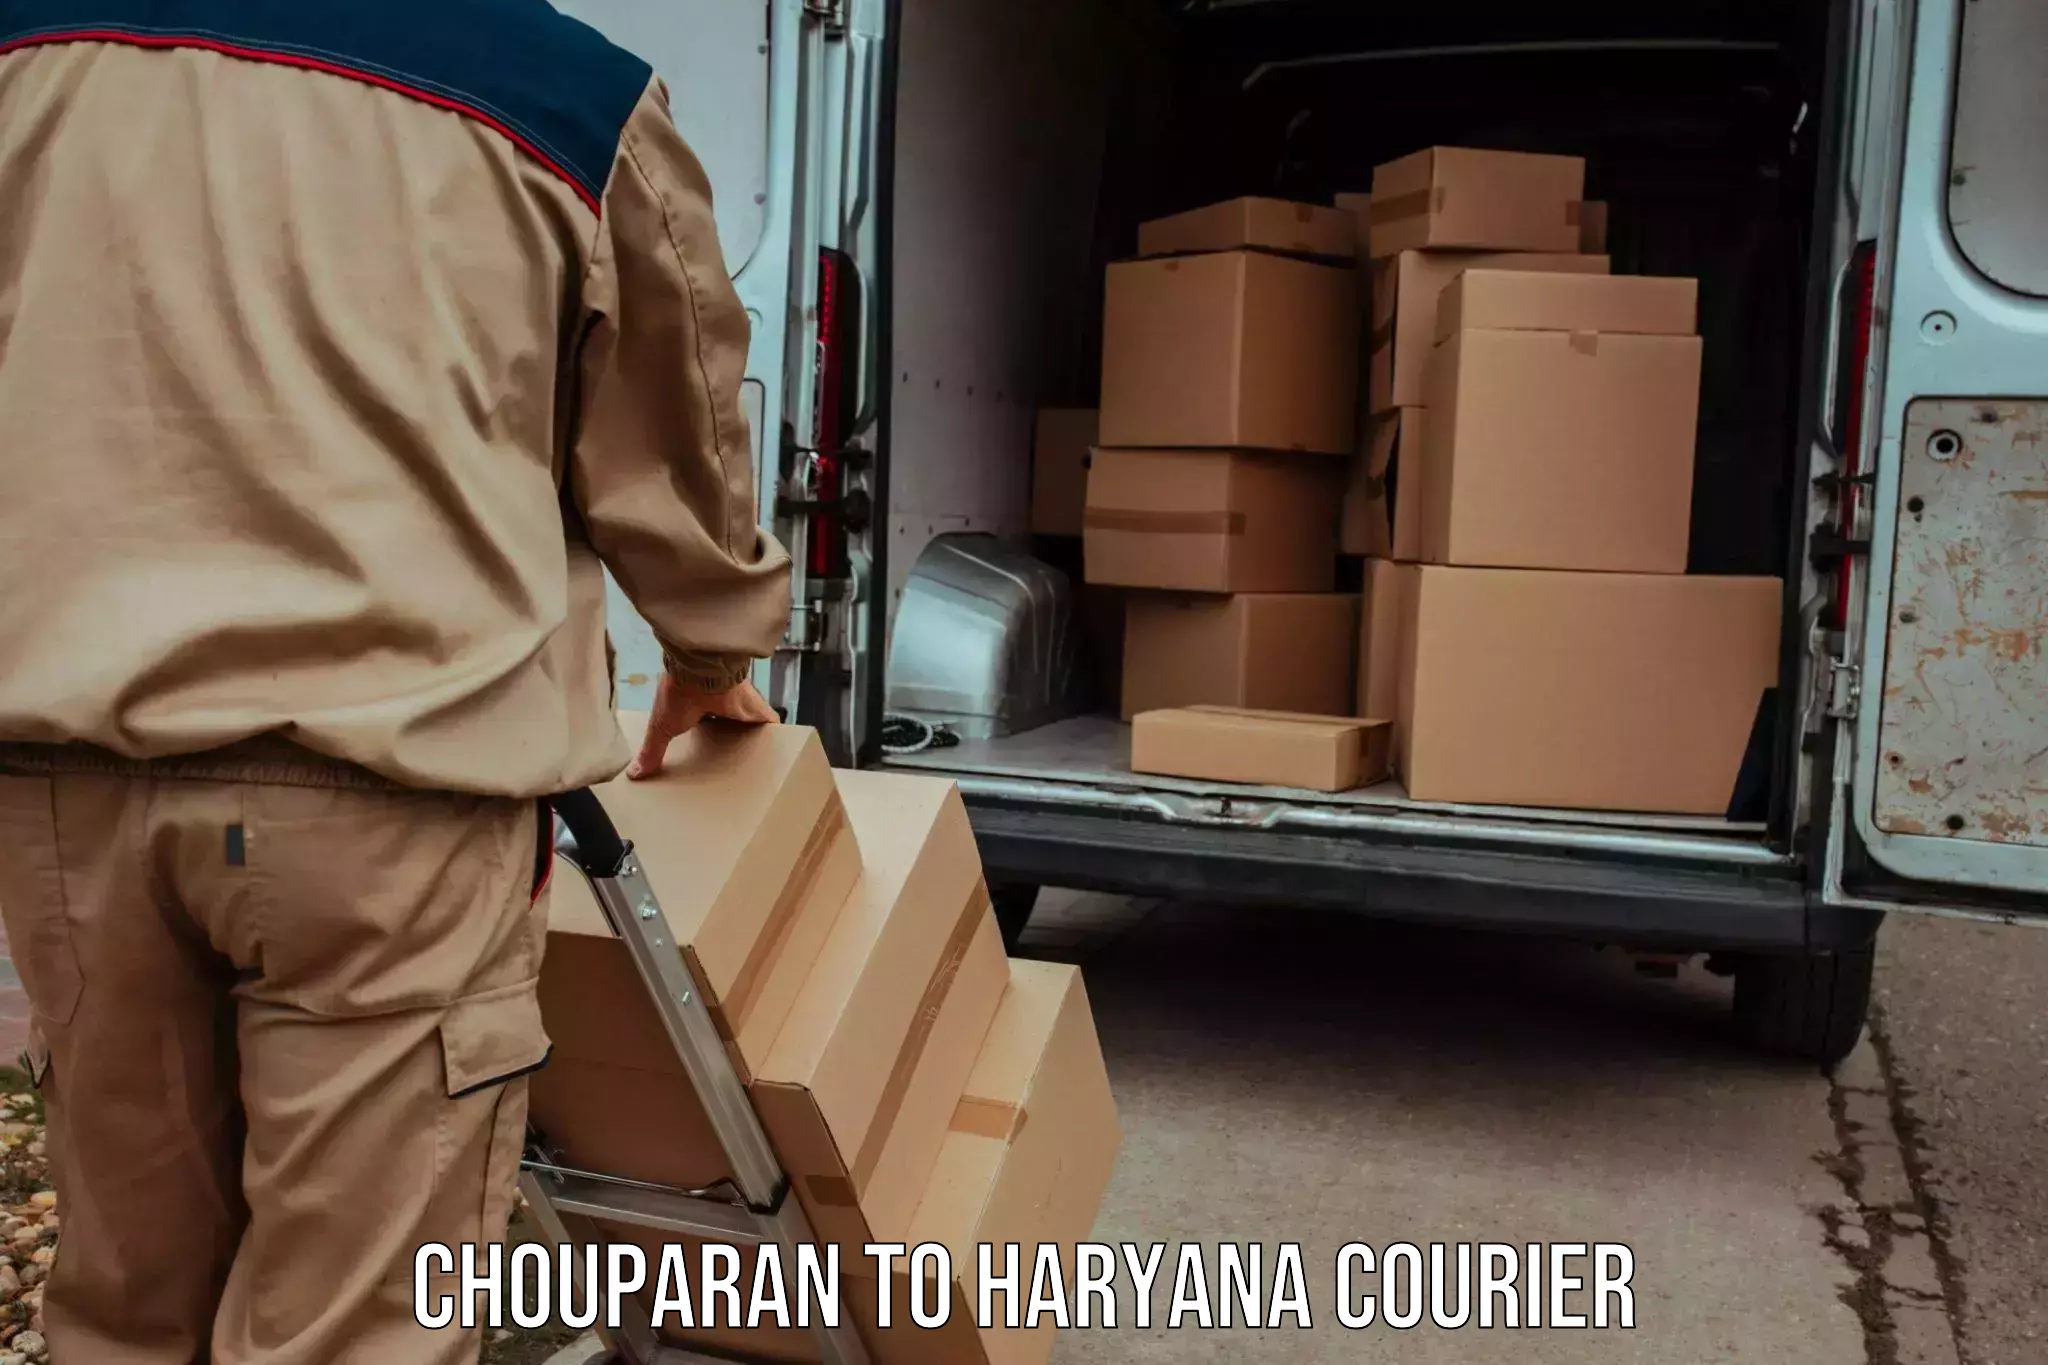 Courier service comparison Chouparan to Odhan